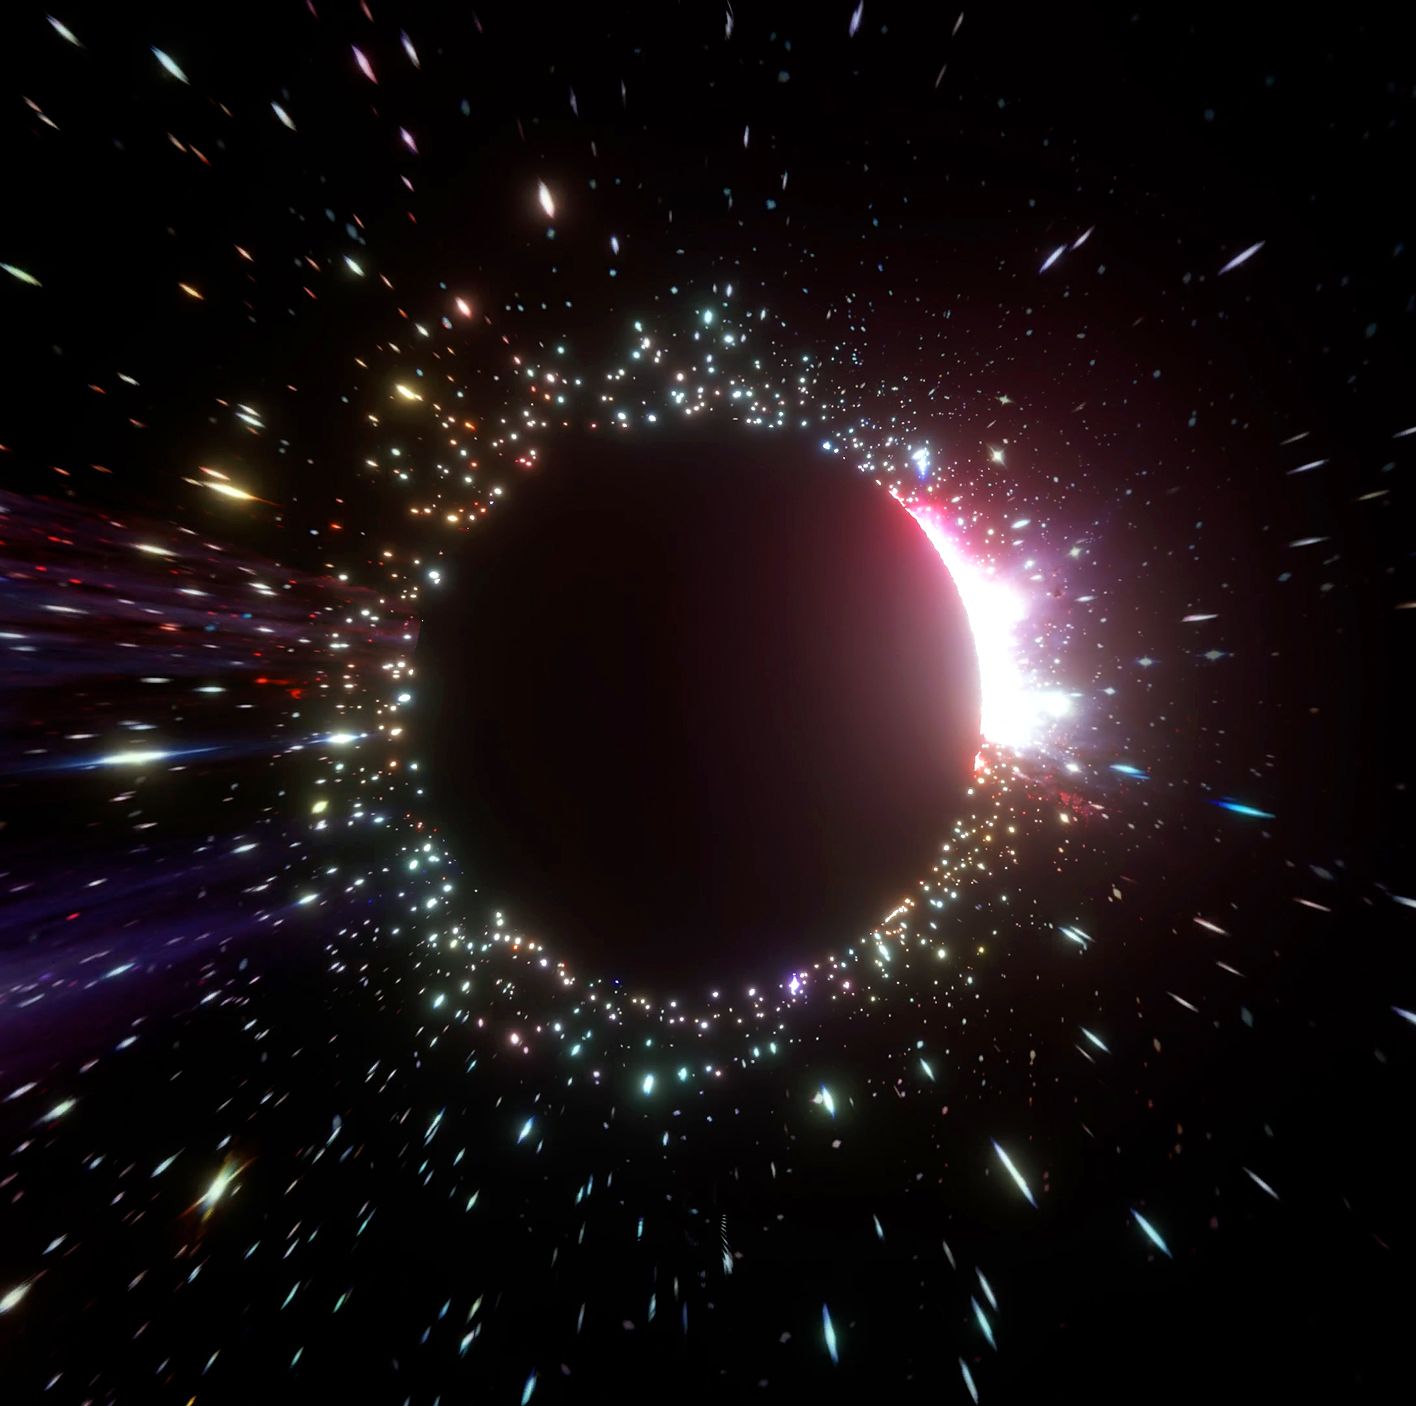 Was Our Universe Formed Inside the Quantum Chaos of Another Universe's Black Hole?